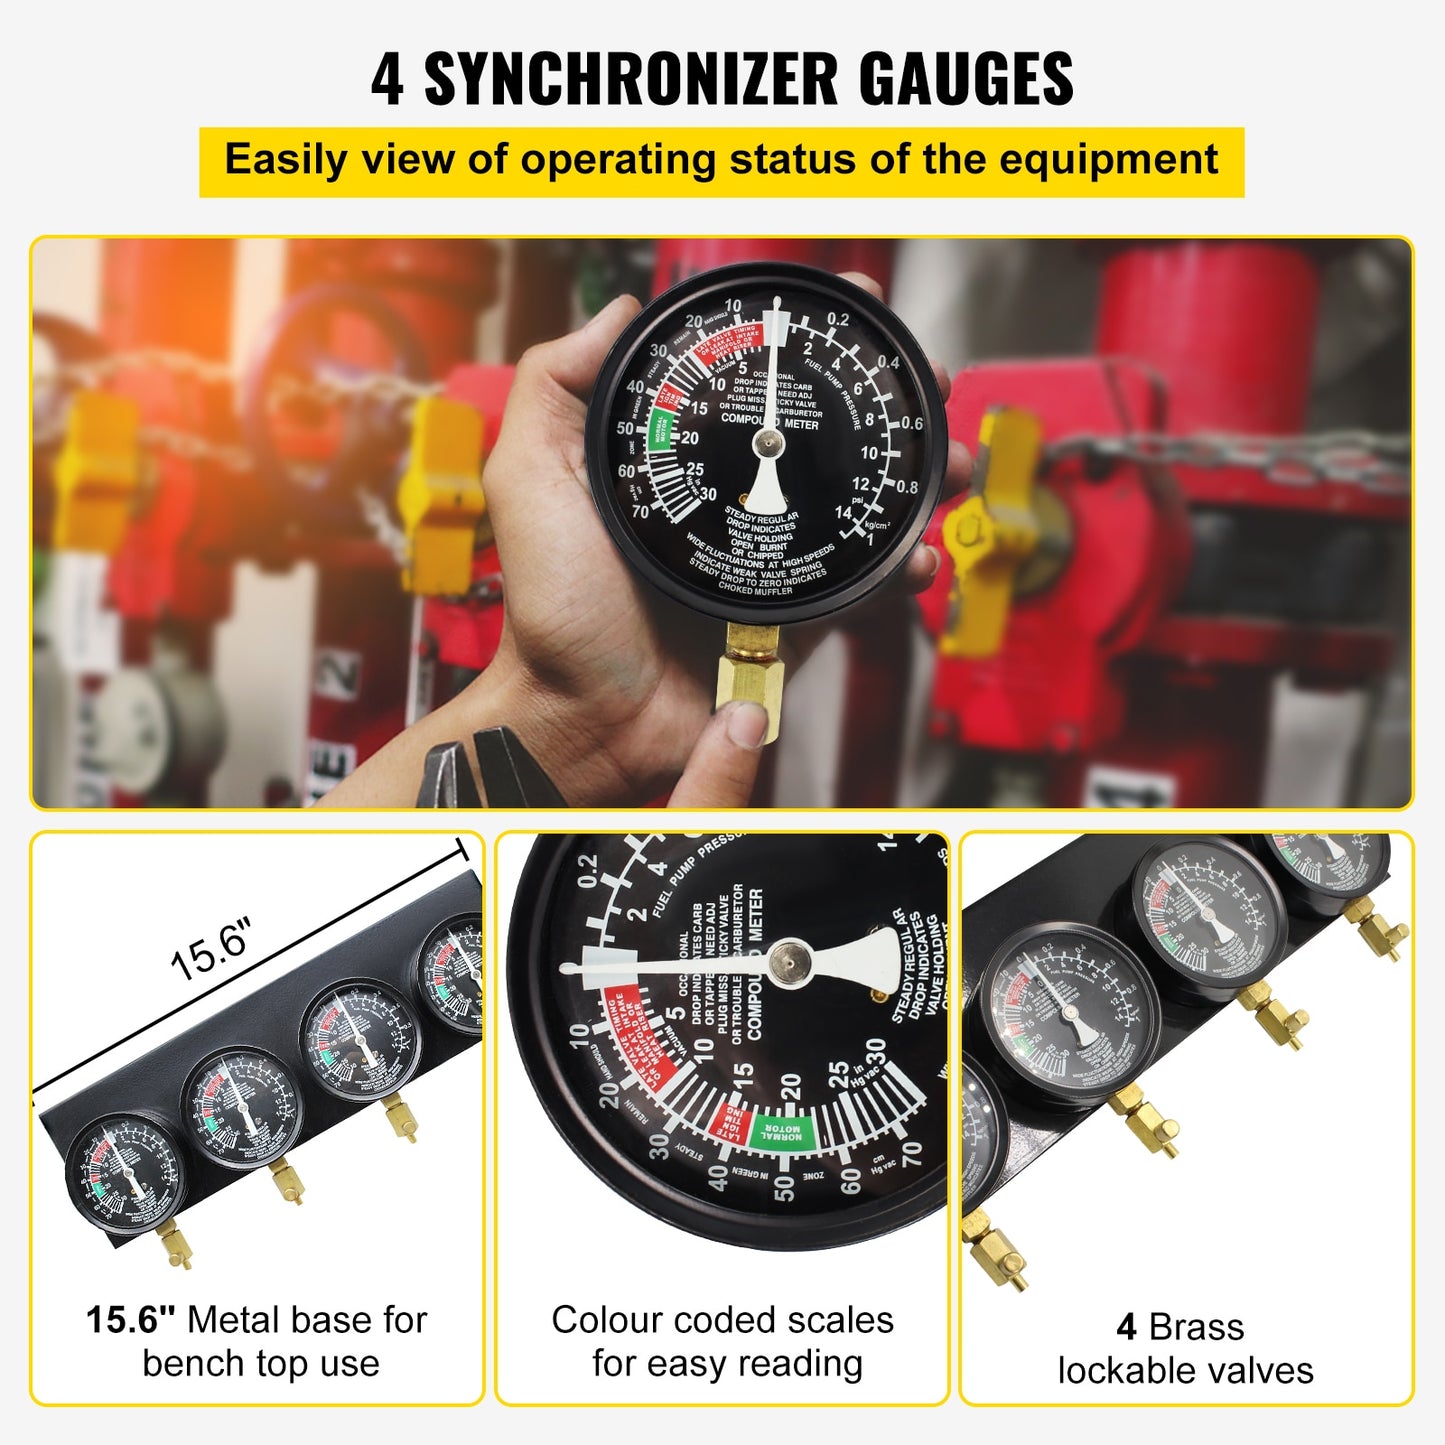 4-Gauge Carburetor Synchronizer Kit: Achieve Perfect Fuel Balance and Performance Tuning for Your Motorcycle with Precision and Ease!